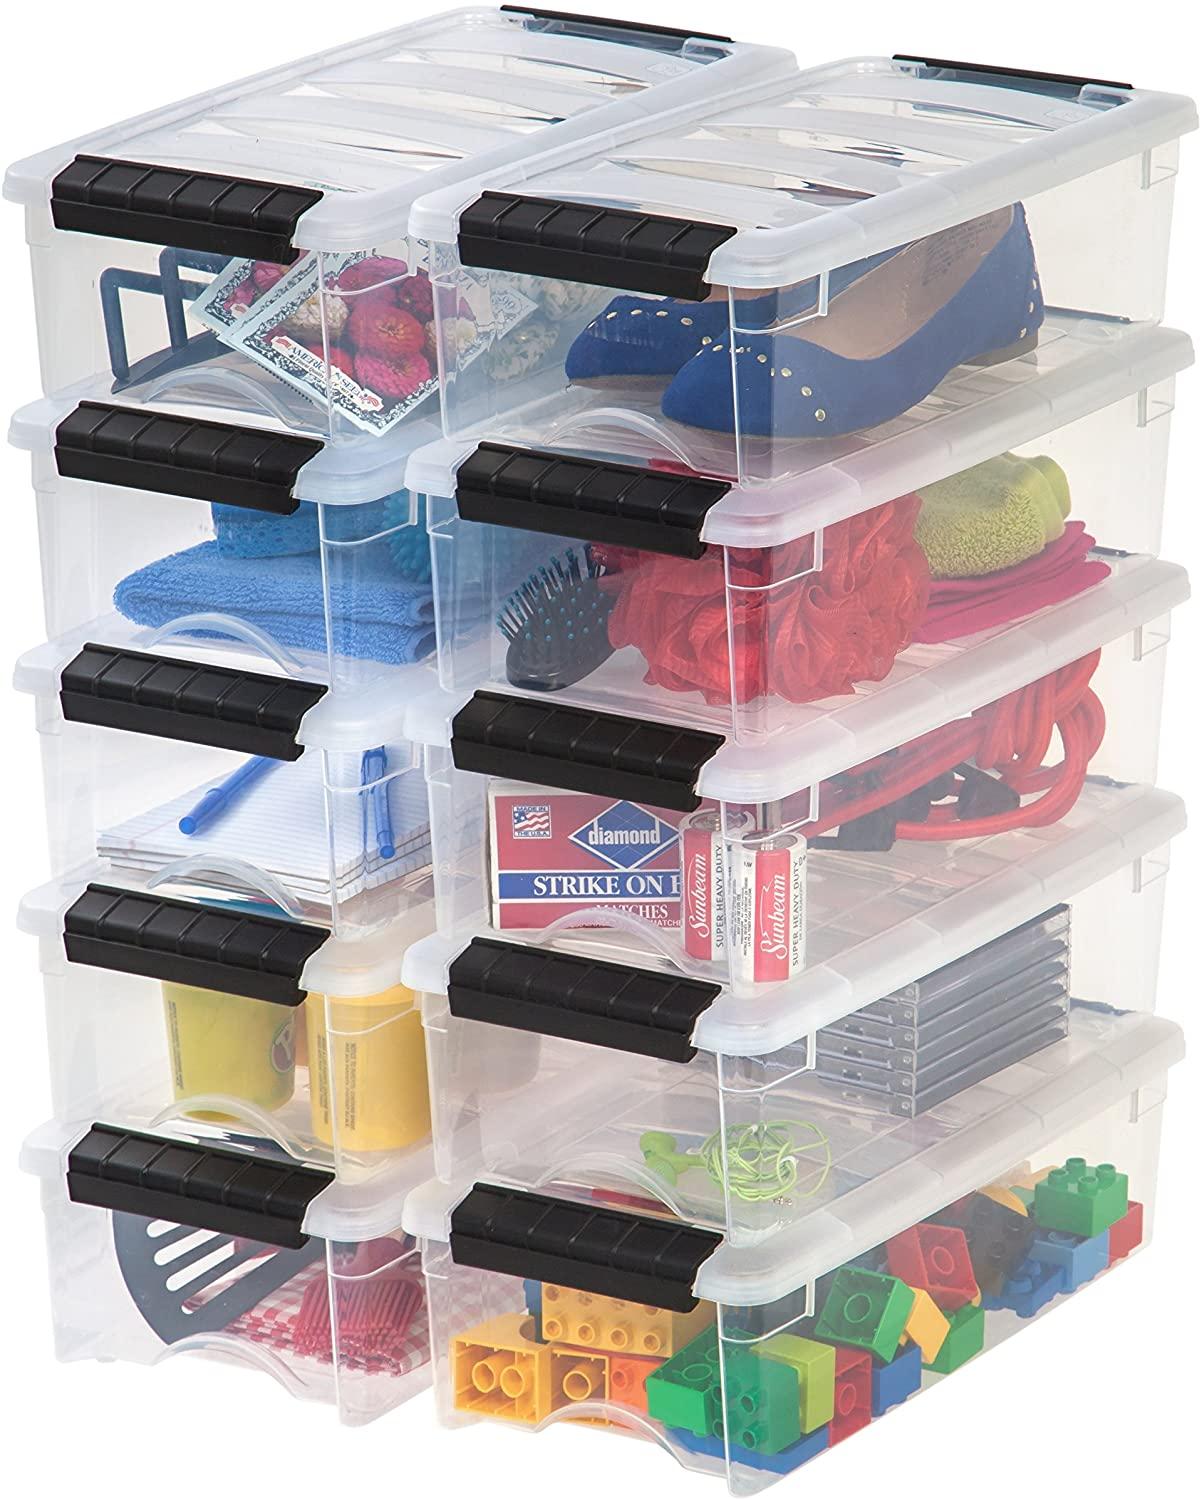 IRIS USA Clear Stackable Small Plastic Storage Bins, 10-Pack